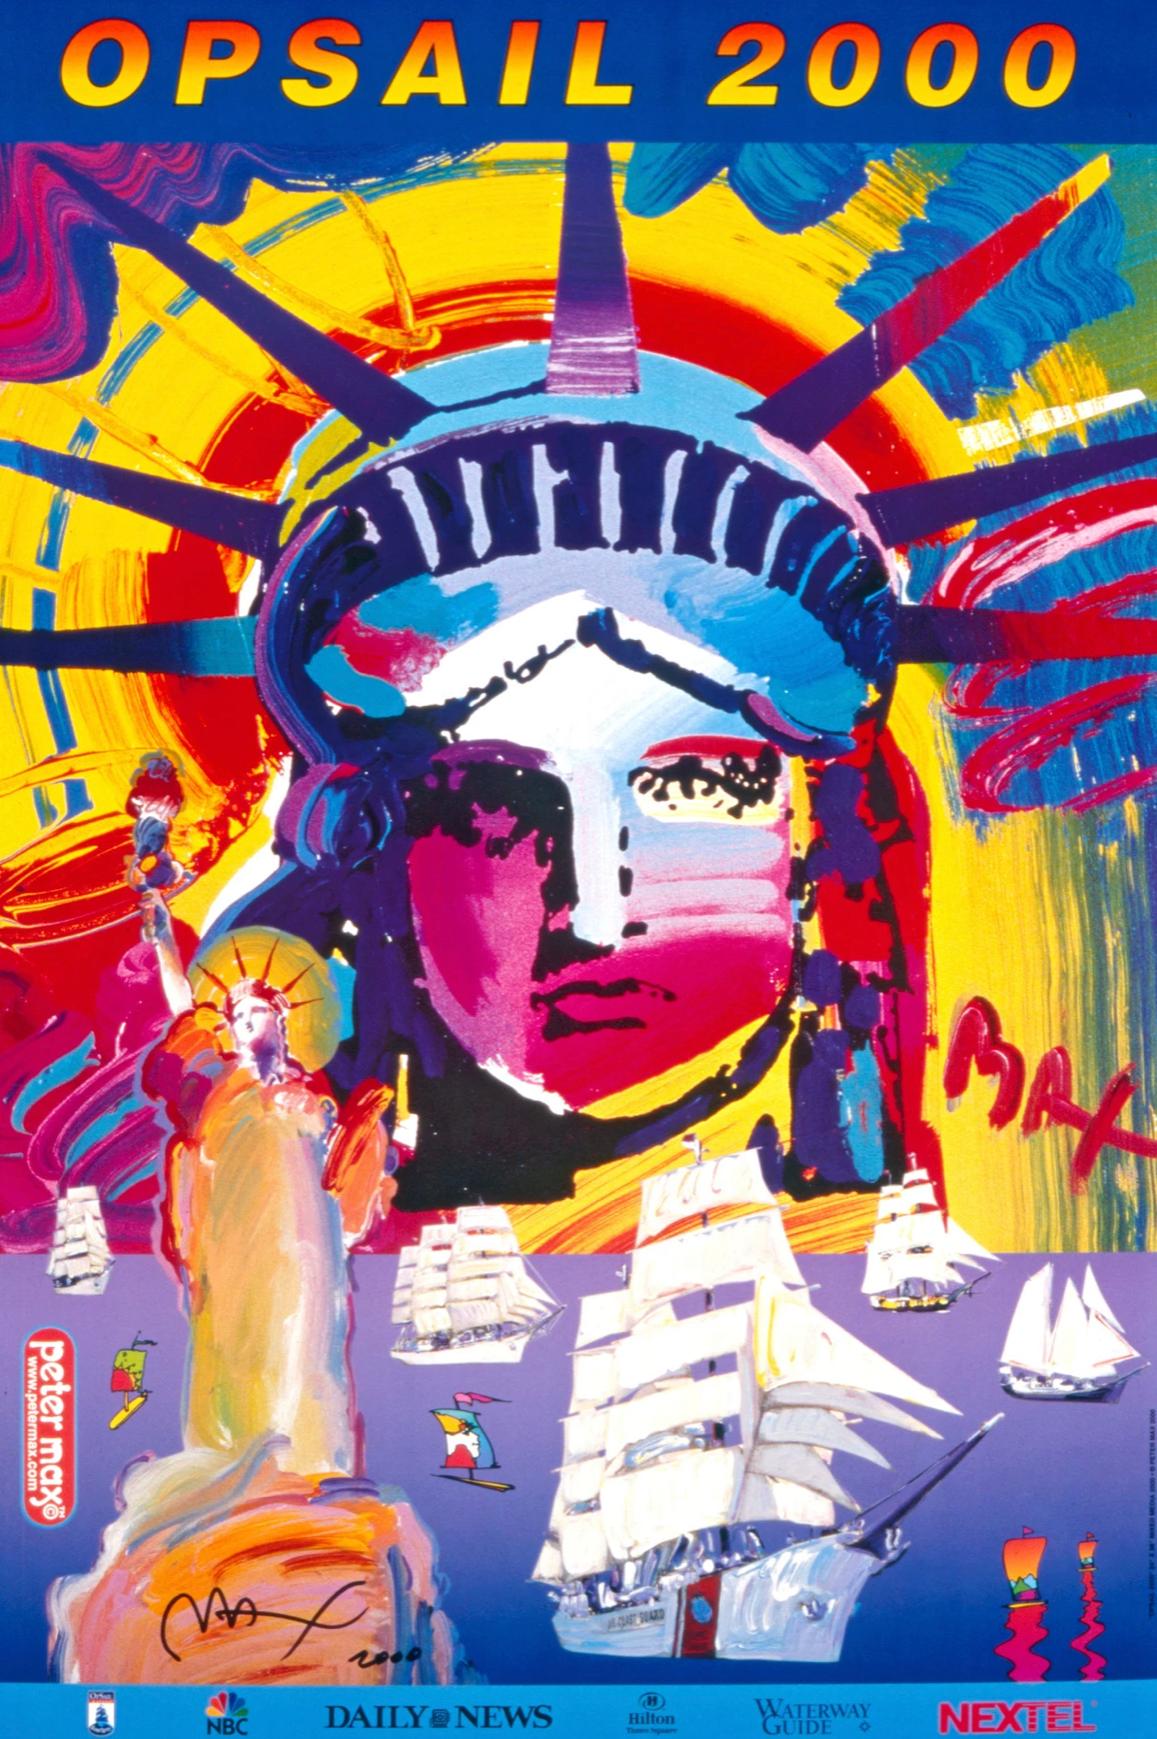 OPSAIL 2000, Peter Max